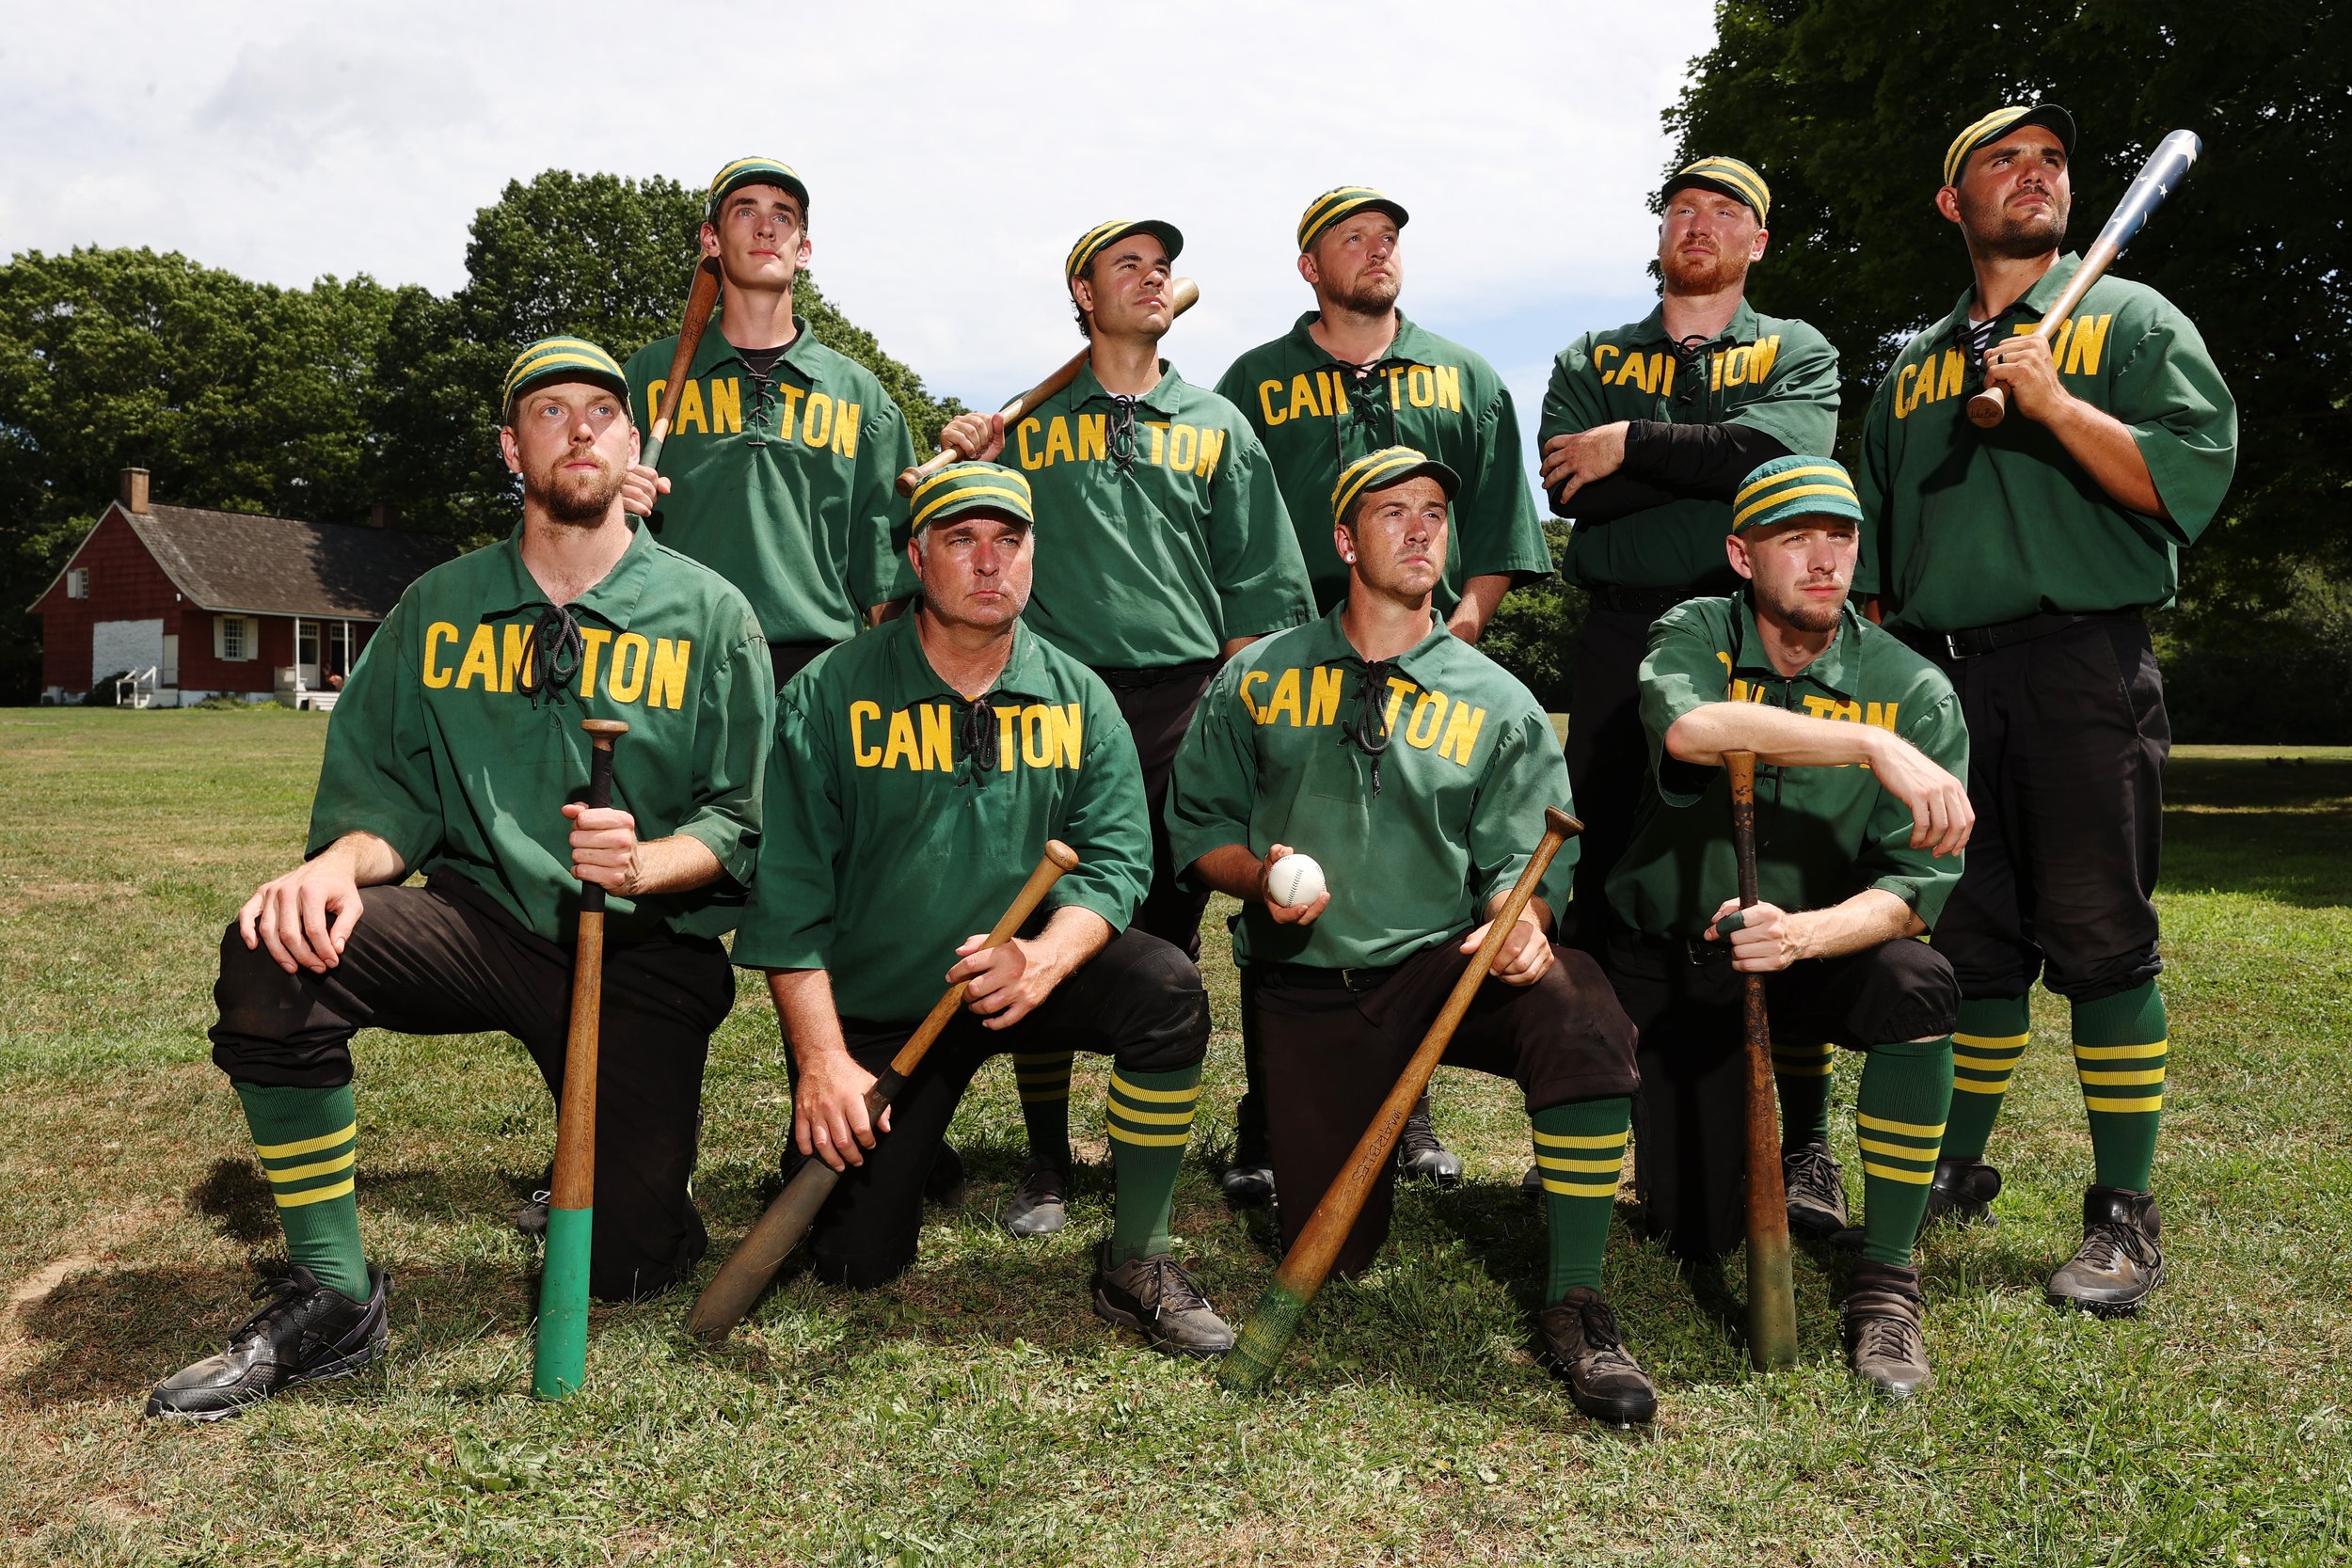  The Canton Cornshuckers pose for a photo during the 25th Annual Doc Adams Old Time Base Ball Festival at Old Bethpage Village Restoration on August 07, 2022 in Old Bethpage, New York. 